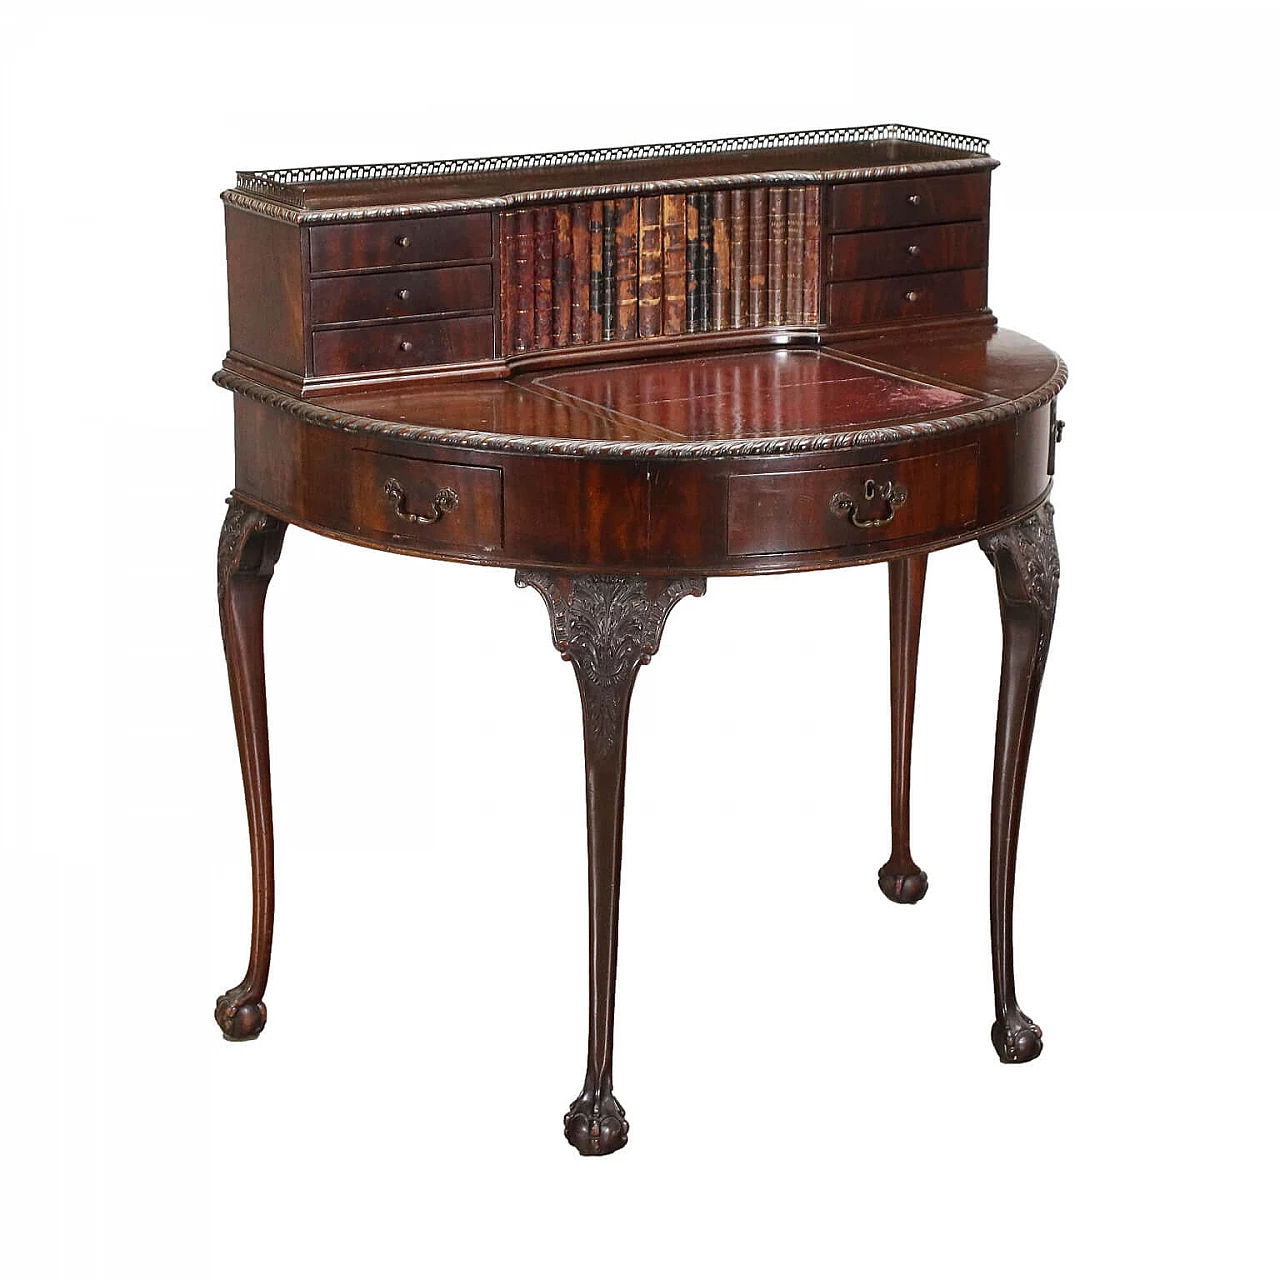 English Chippendale desk with compartment disguised as a false bookcase, 19th century 1